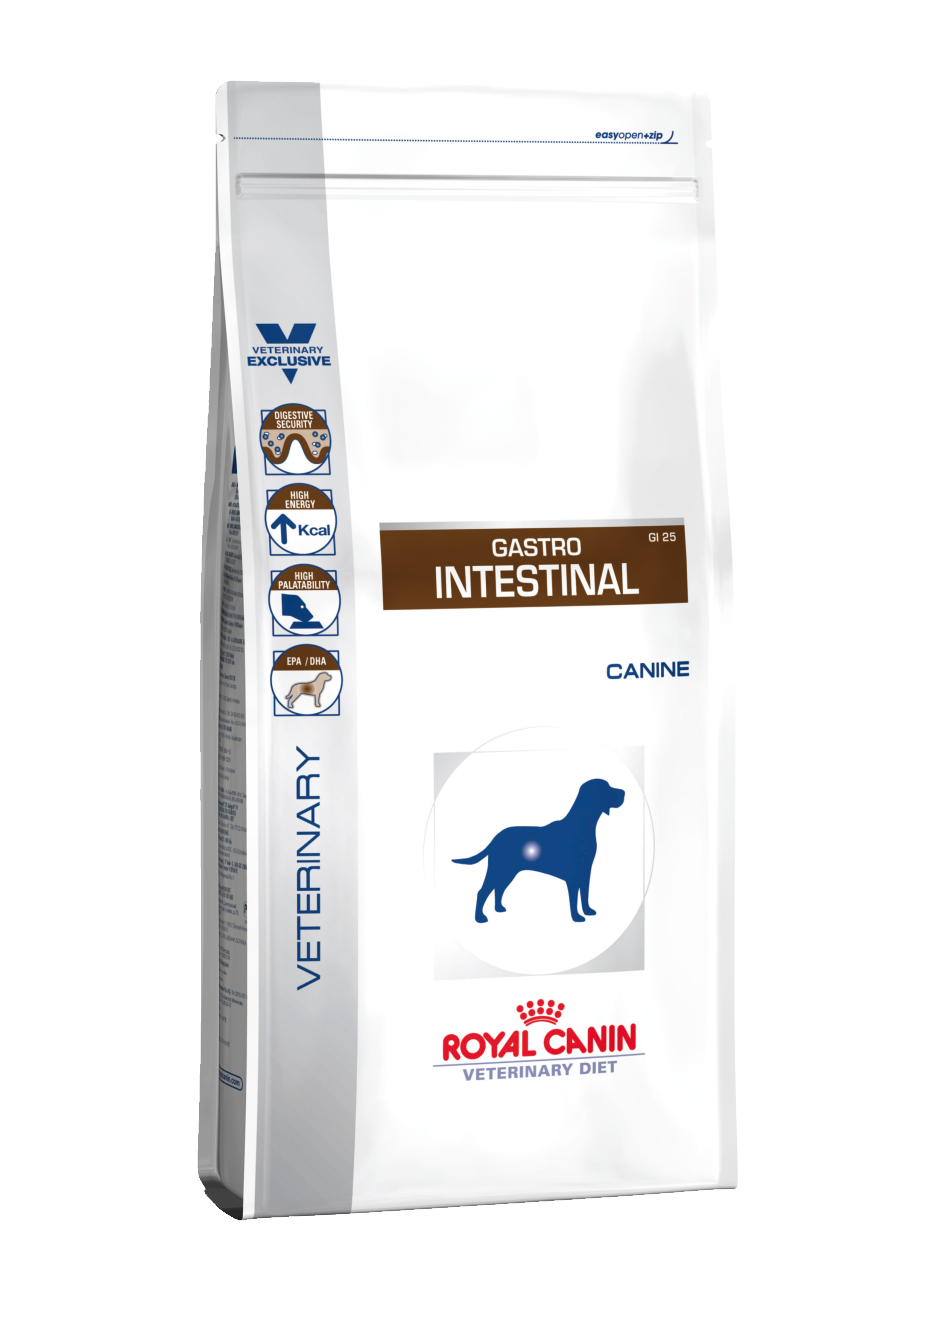 Dog Vet Products - Royal Canin